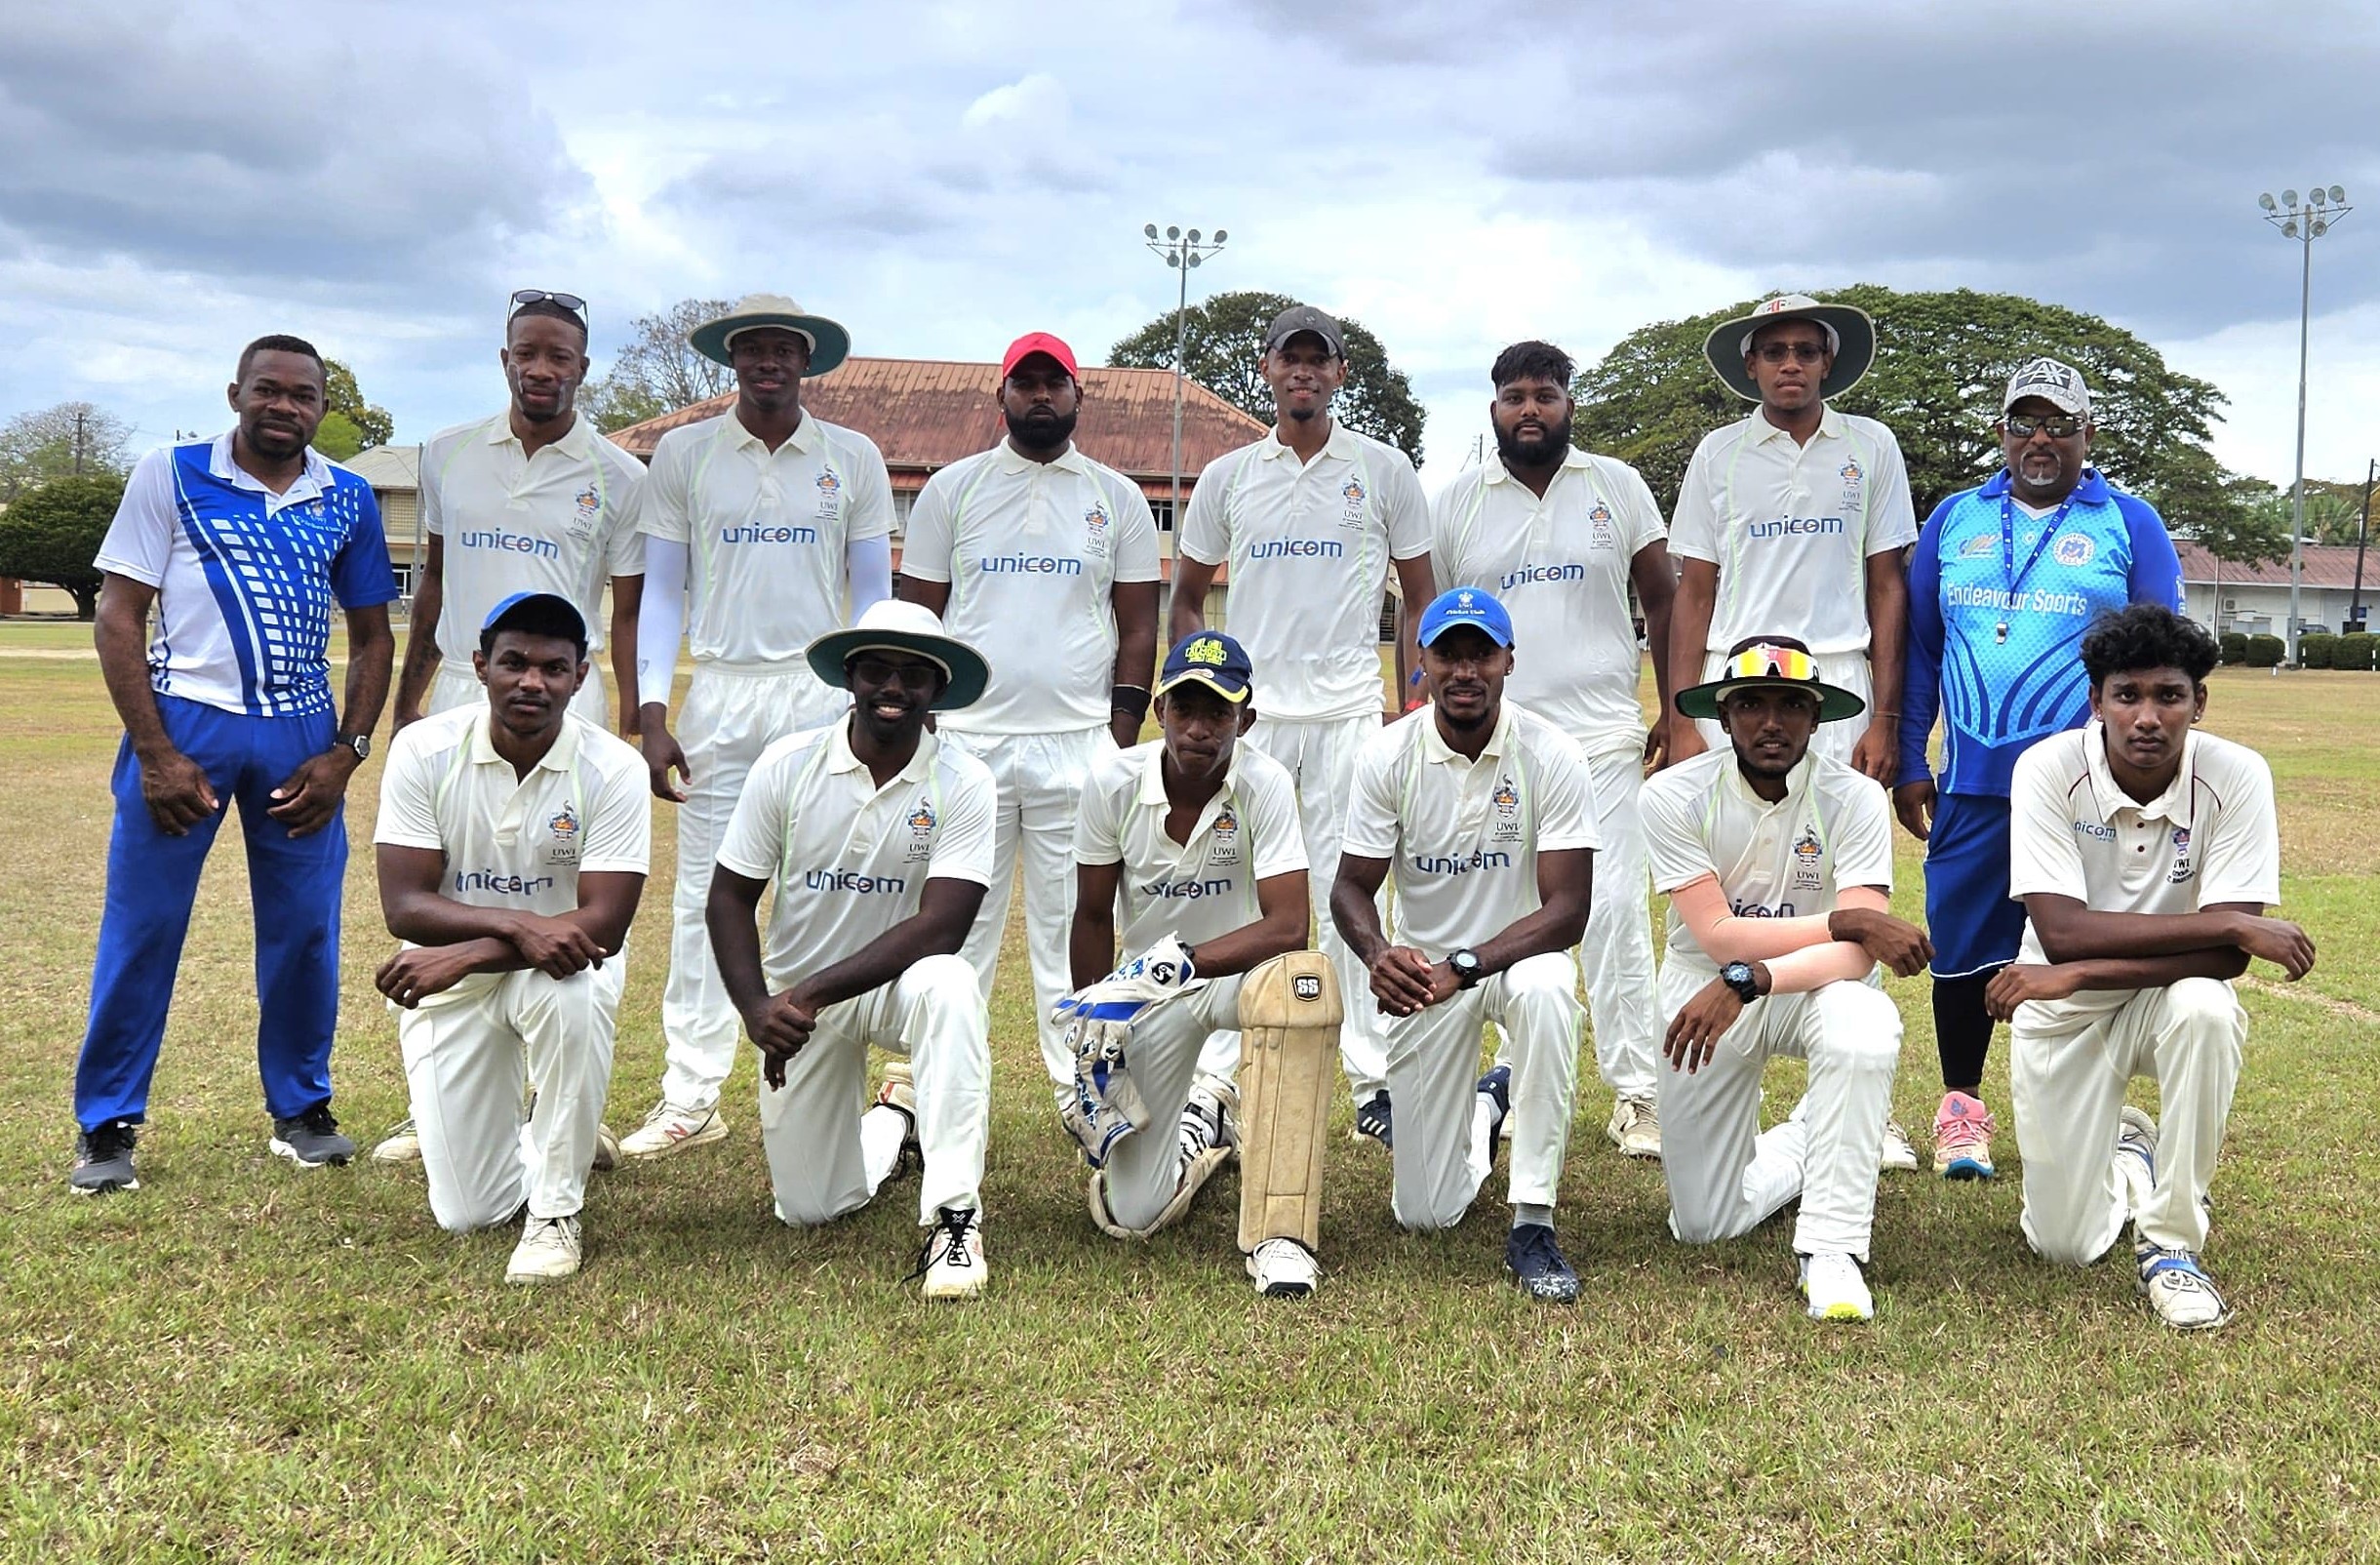 UWI Cricket Club shines at TTCB East Zone Competitions